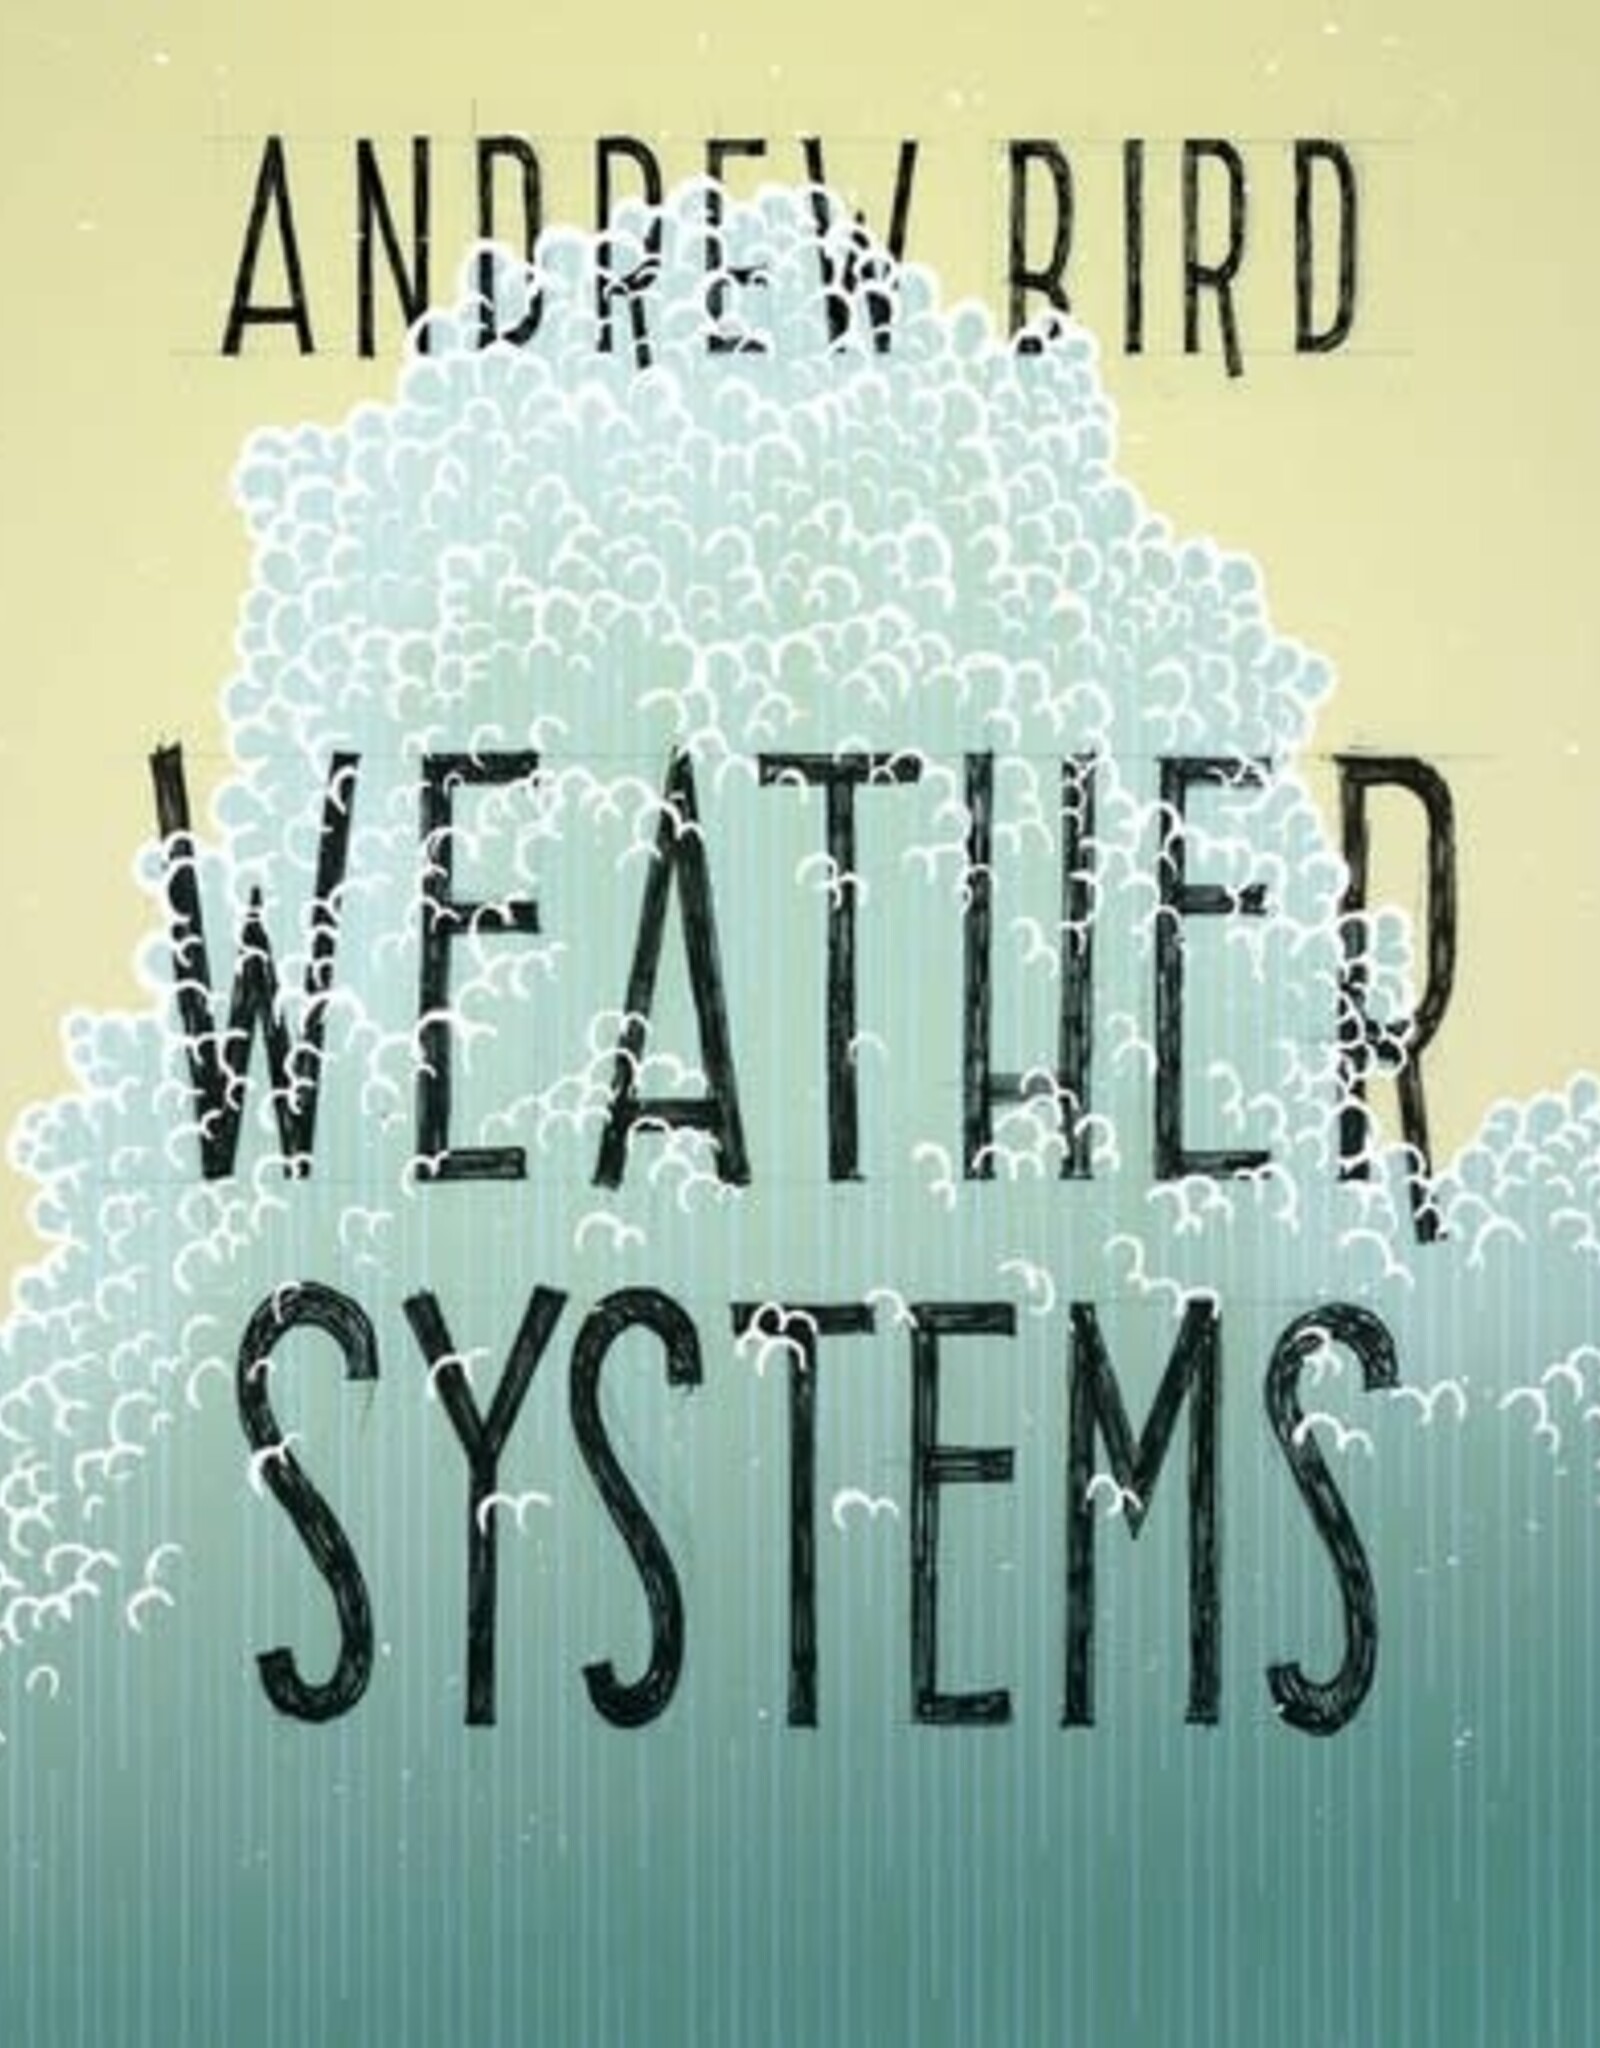 Andrew Bird - Weather Systems